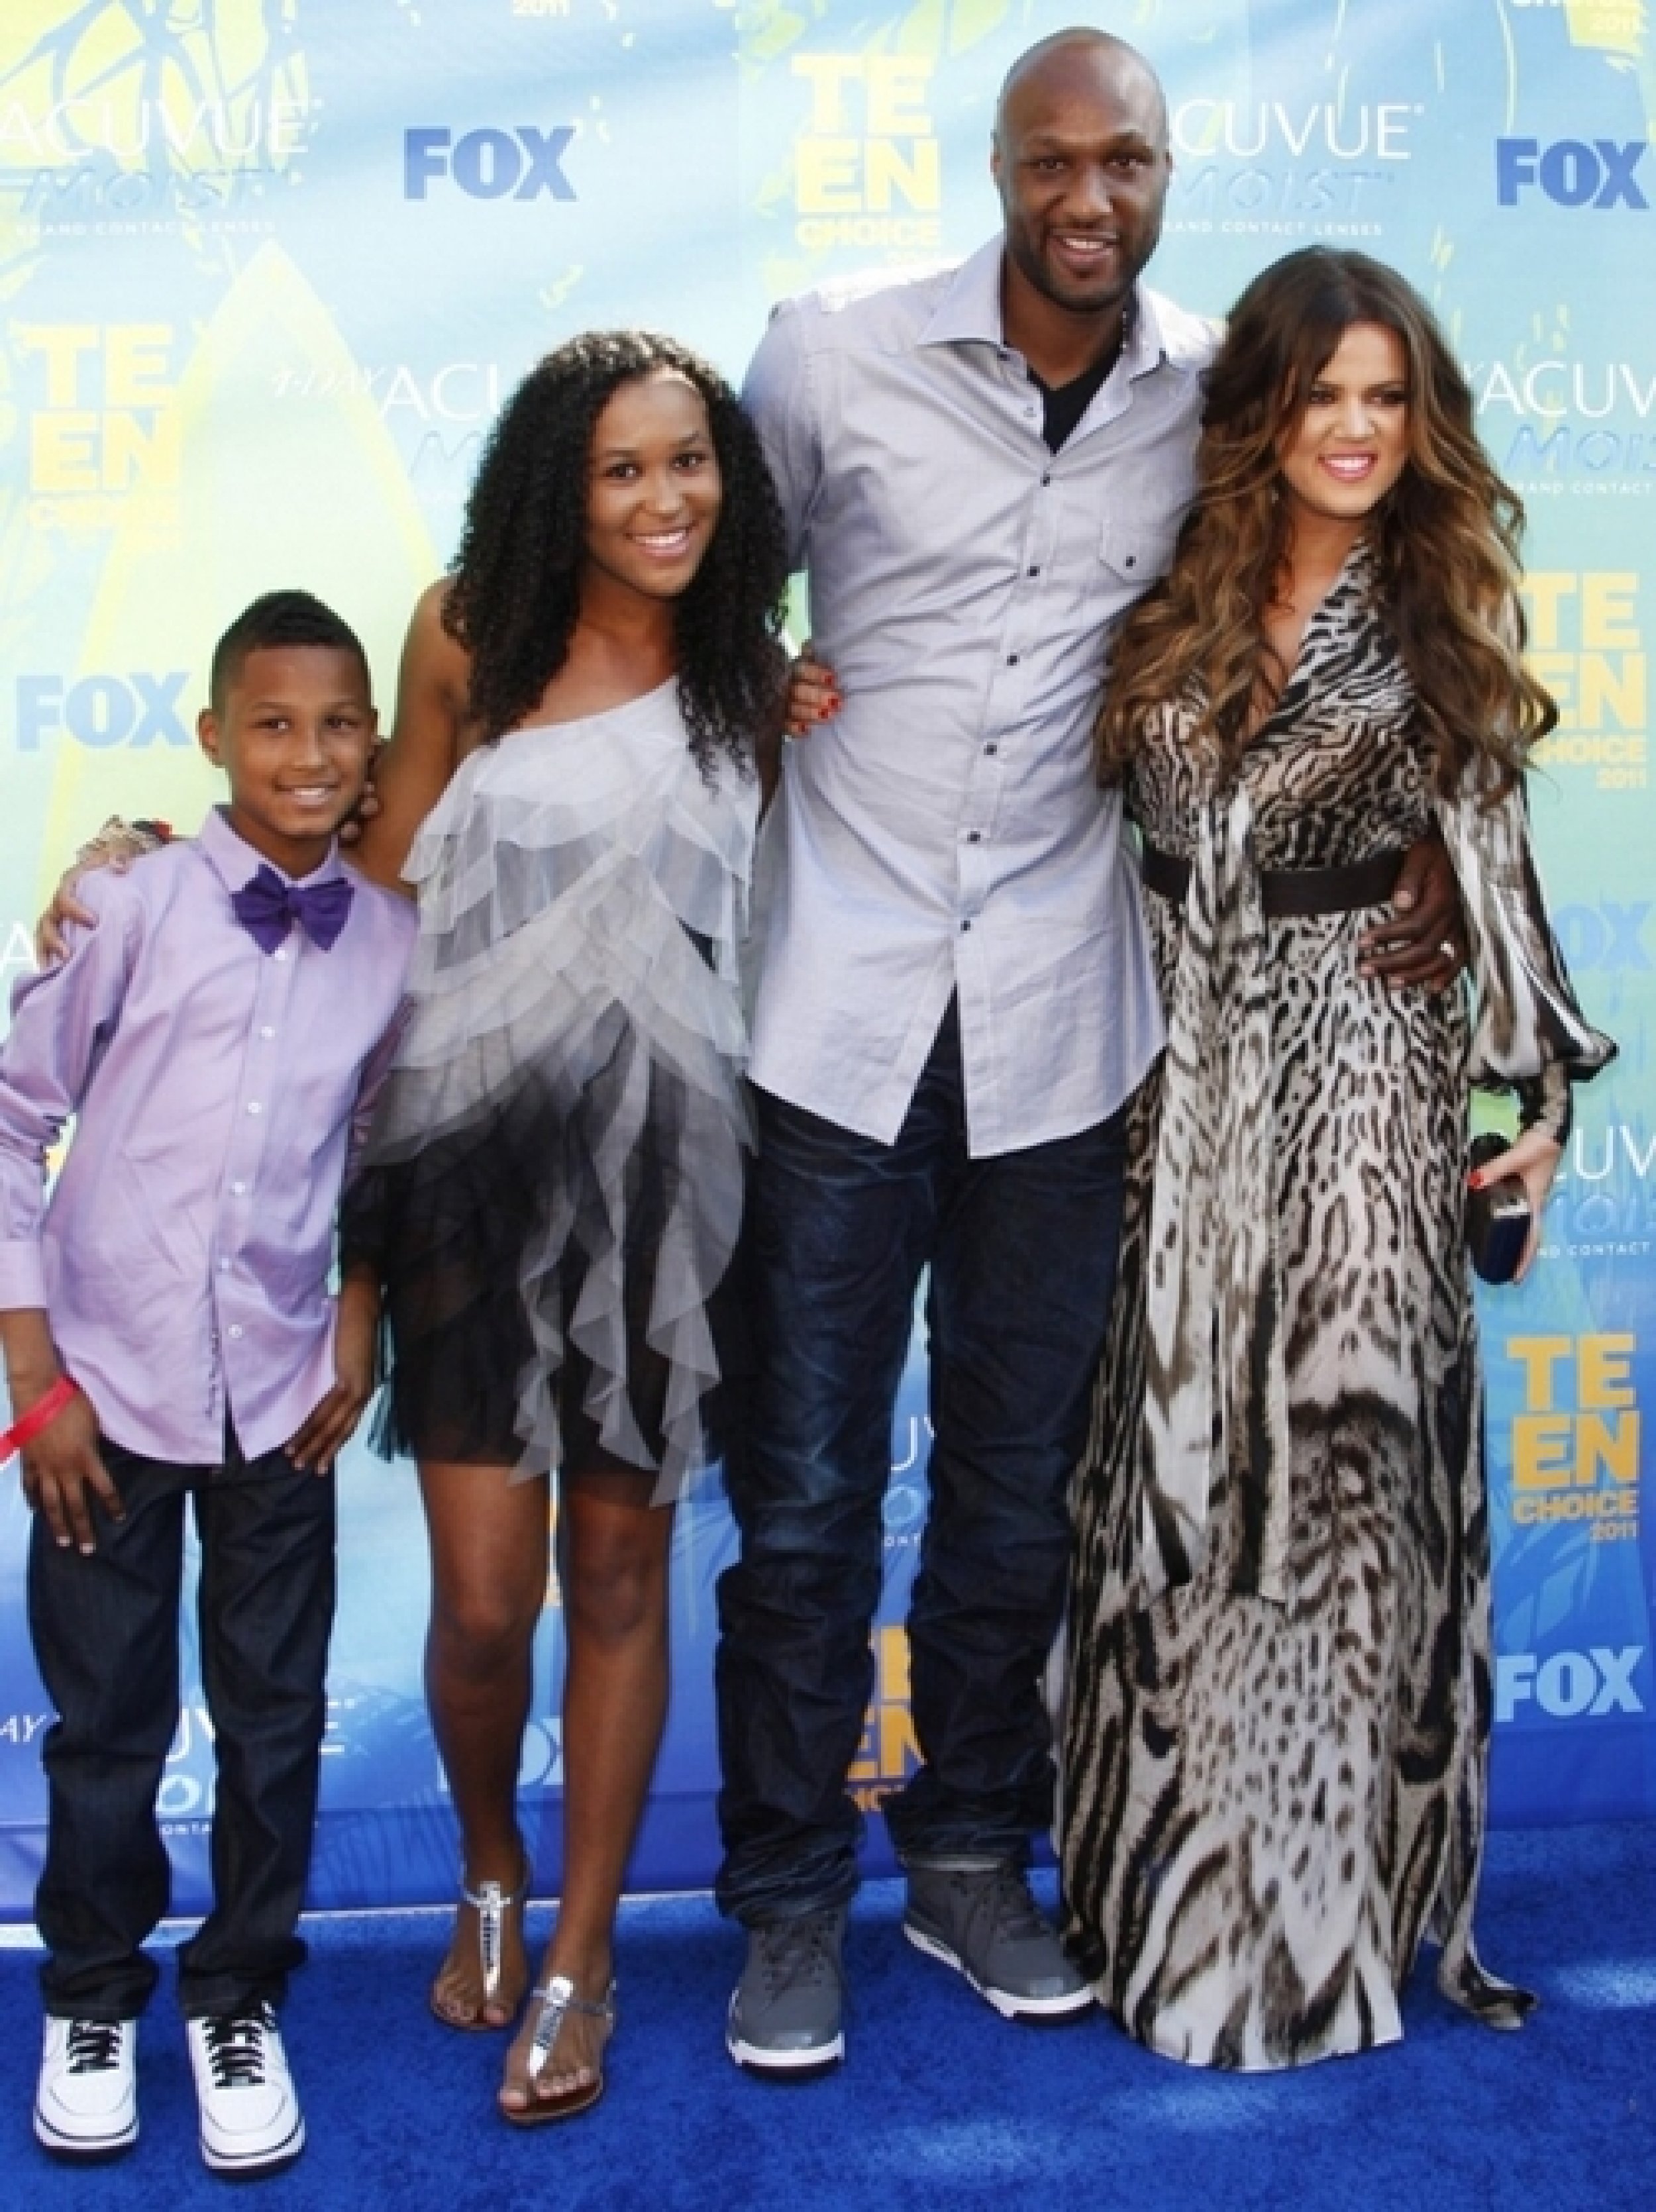 Lamar Odom S Daughter Destiny No One Thought They Were Going To Last She Says About Khloe